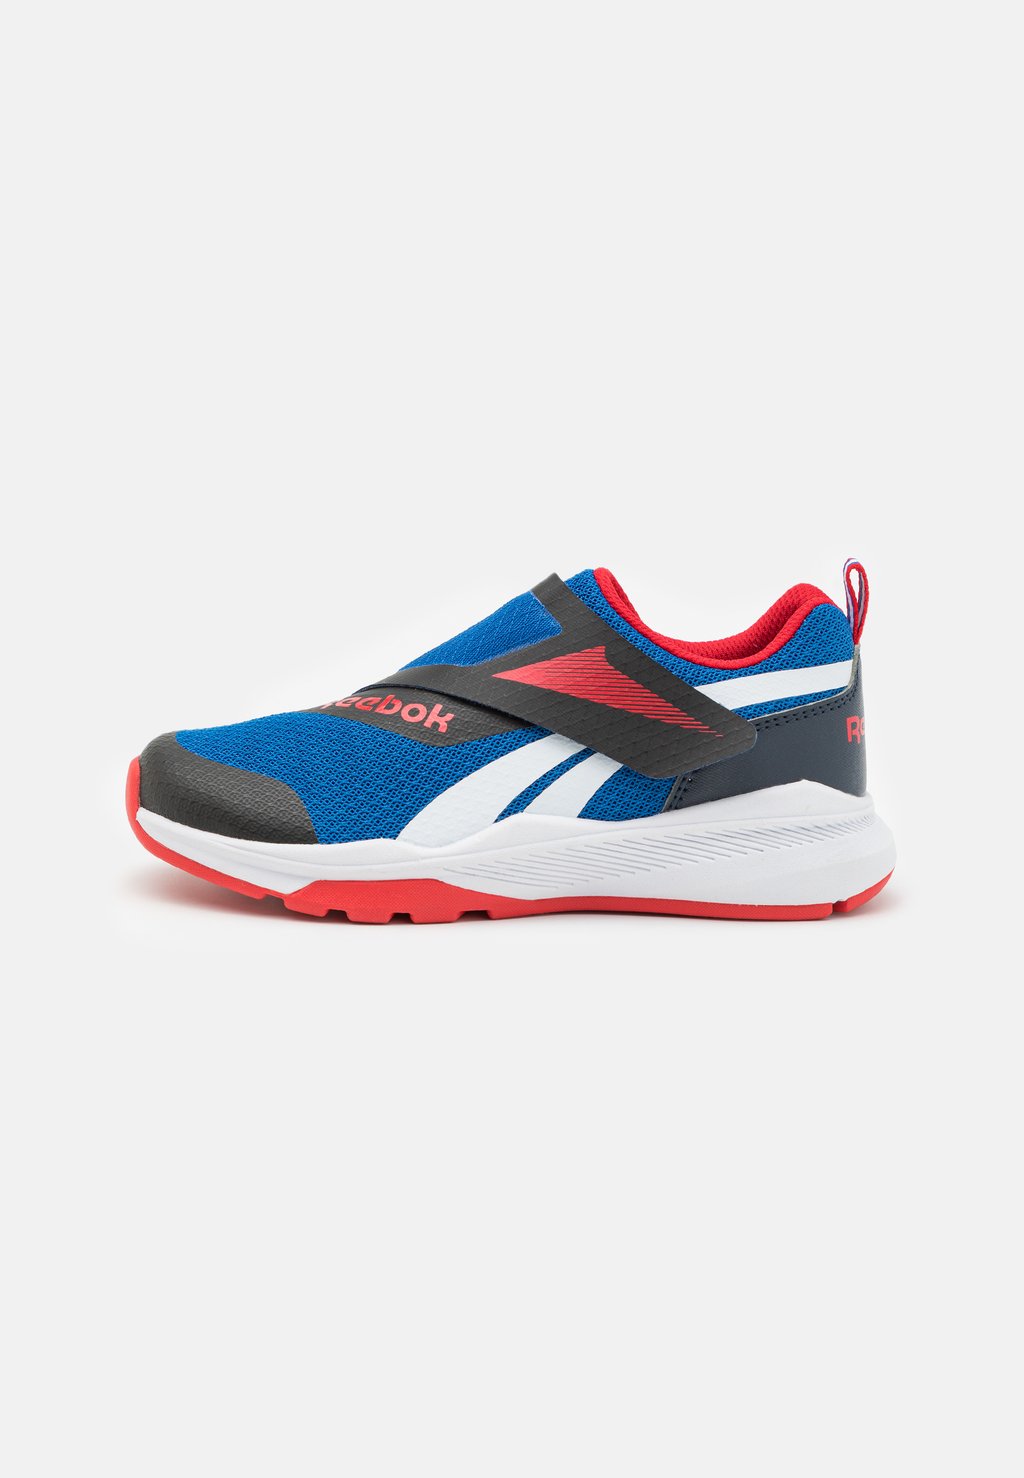 Кроссовки EQUAL FIT UNISEX Reebok, цвет obs/vector blue/vector red